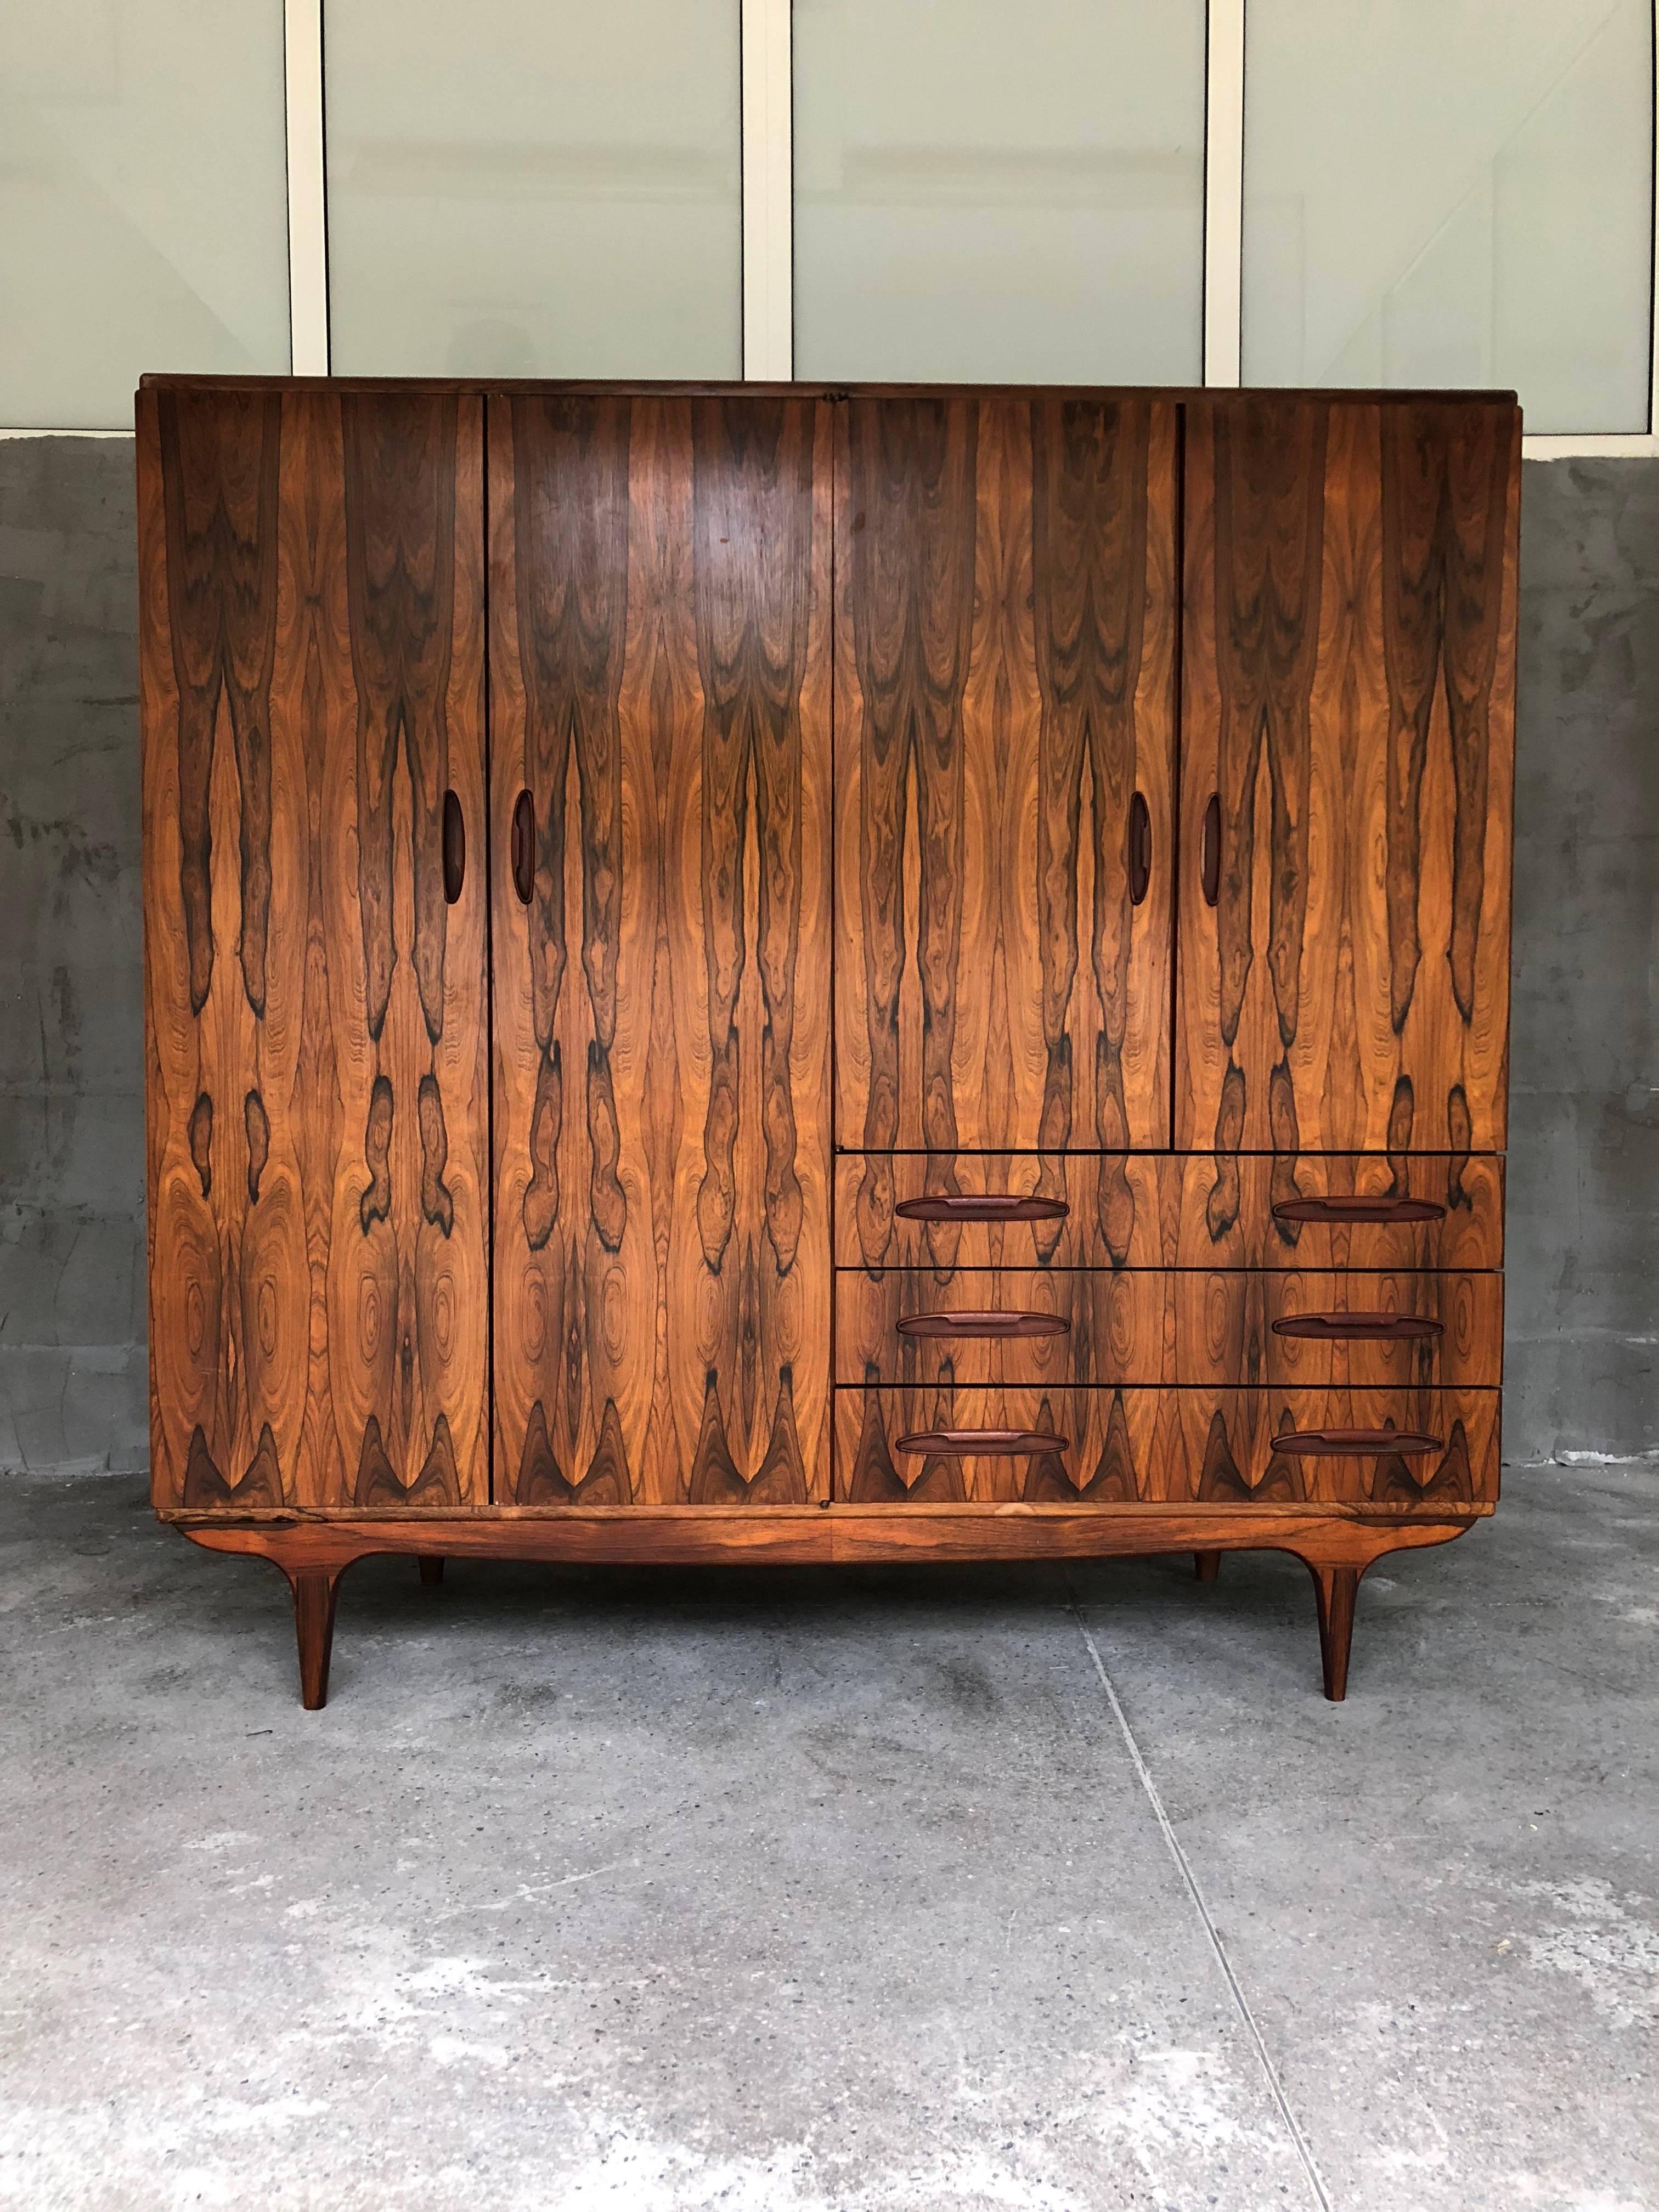 Exceptional and very rare to find Scandinavian style Rio palisander armoire from the 1960s bought in Paris. One of the teck handles was broken but restored. Otherwise in excellent condition. But still minor traces of age and use could be visible on